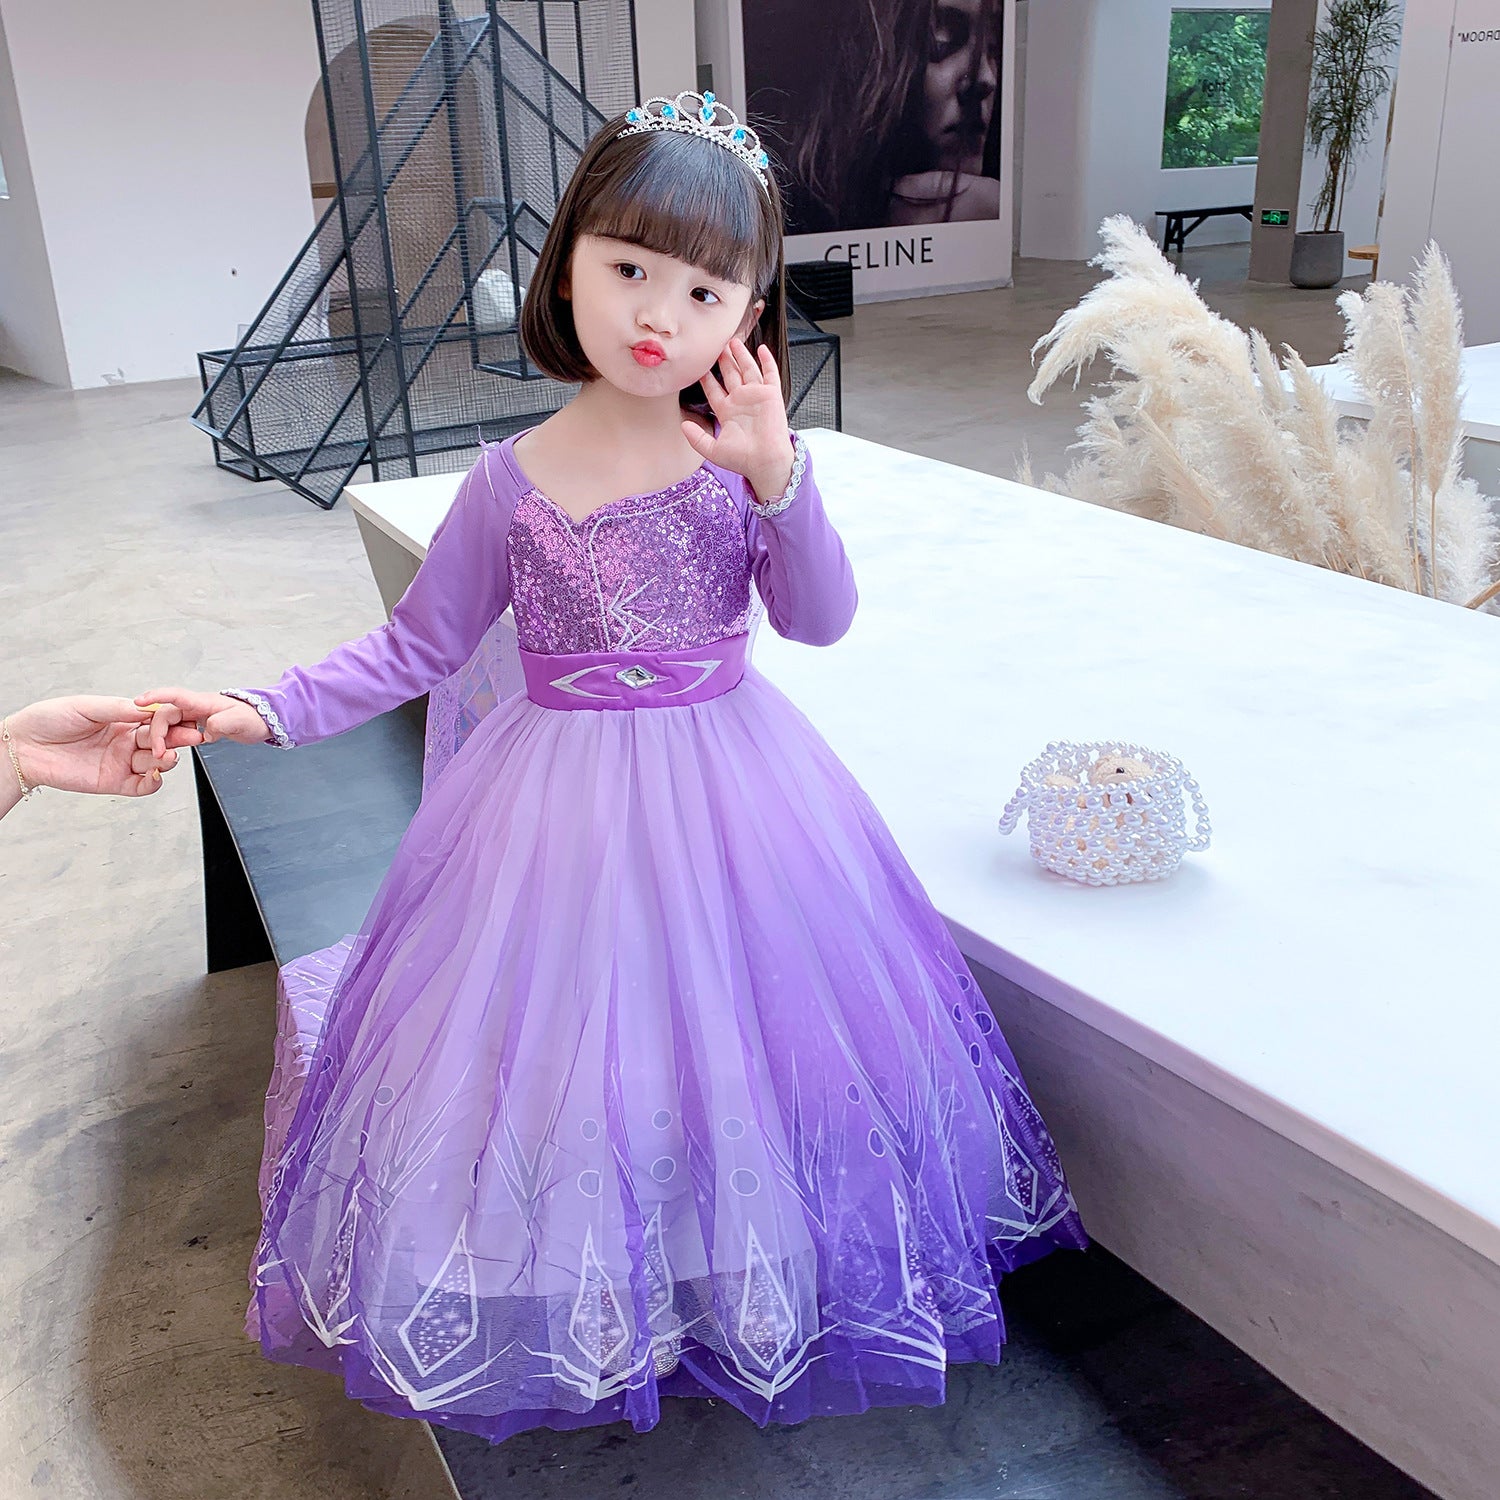 Frozen Princess Elsa dress with cape Dress Birthday Girl Costume Dresses For Cosplay Party Holiday Wedding